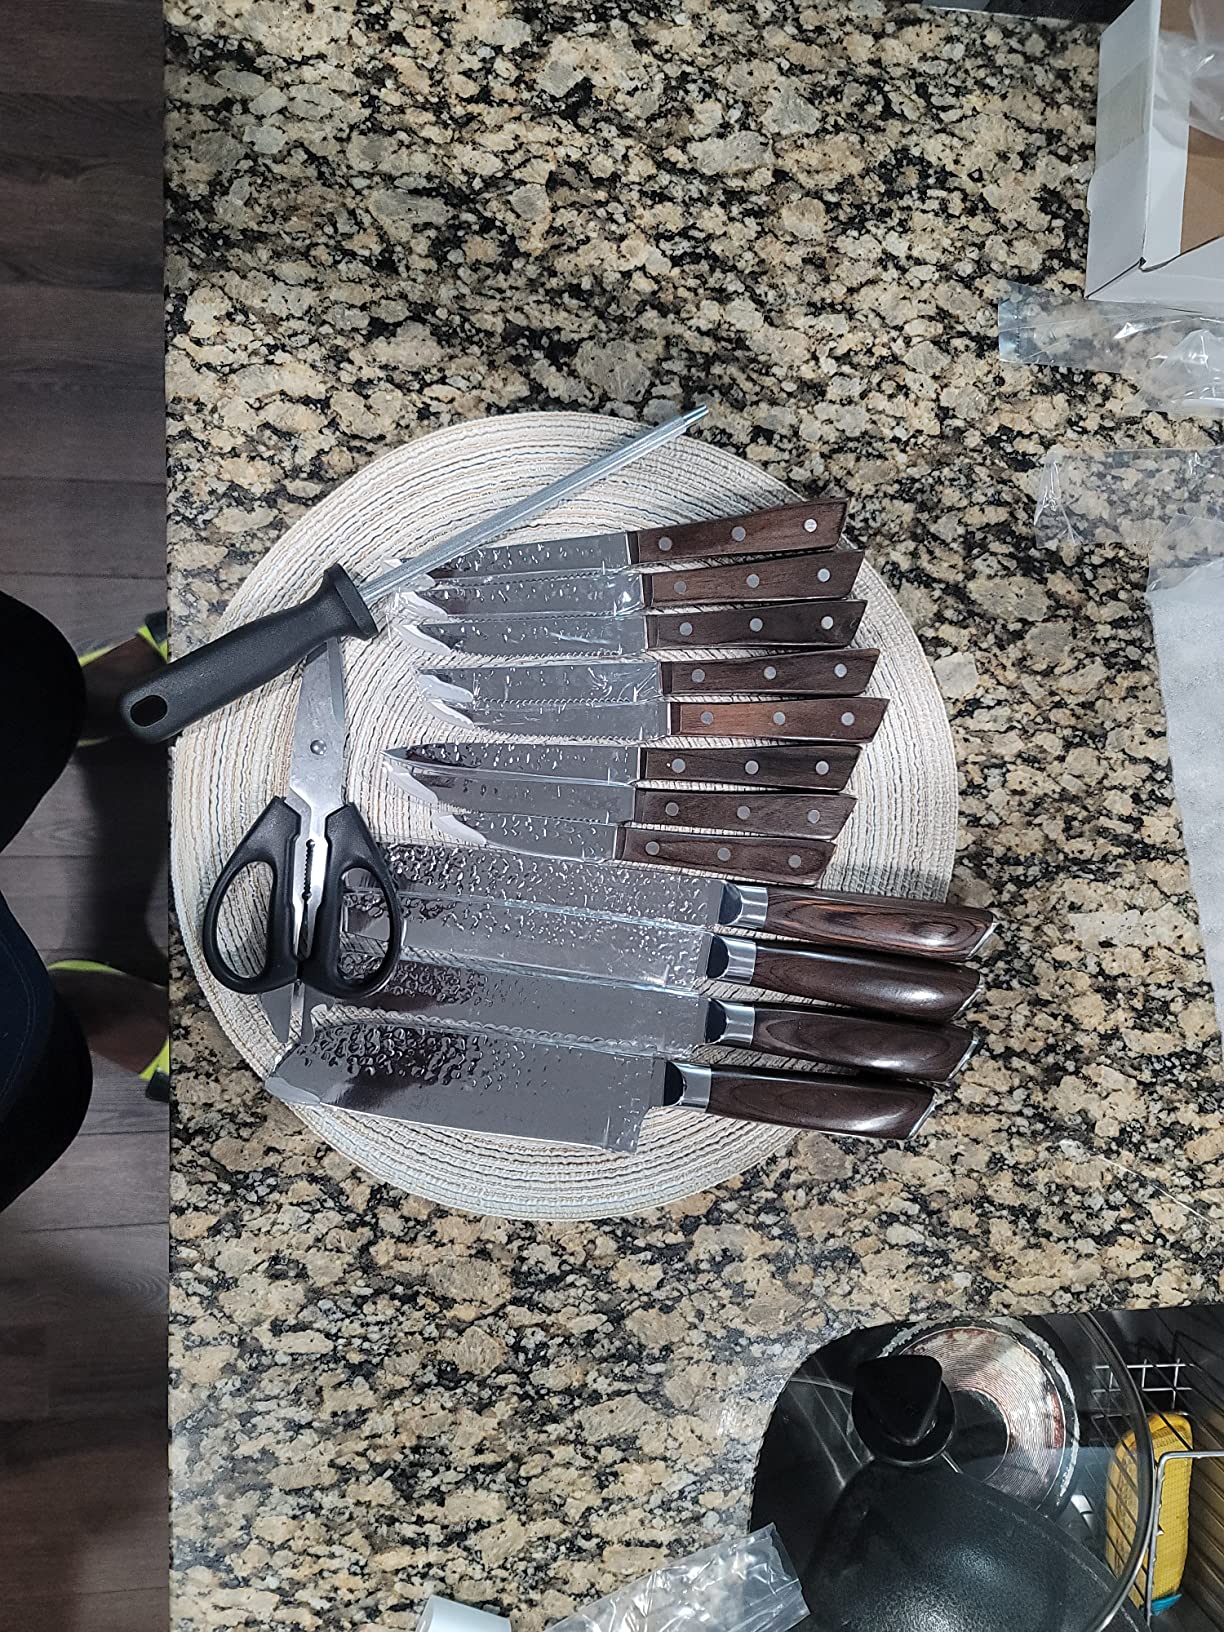 Perfect set of knives